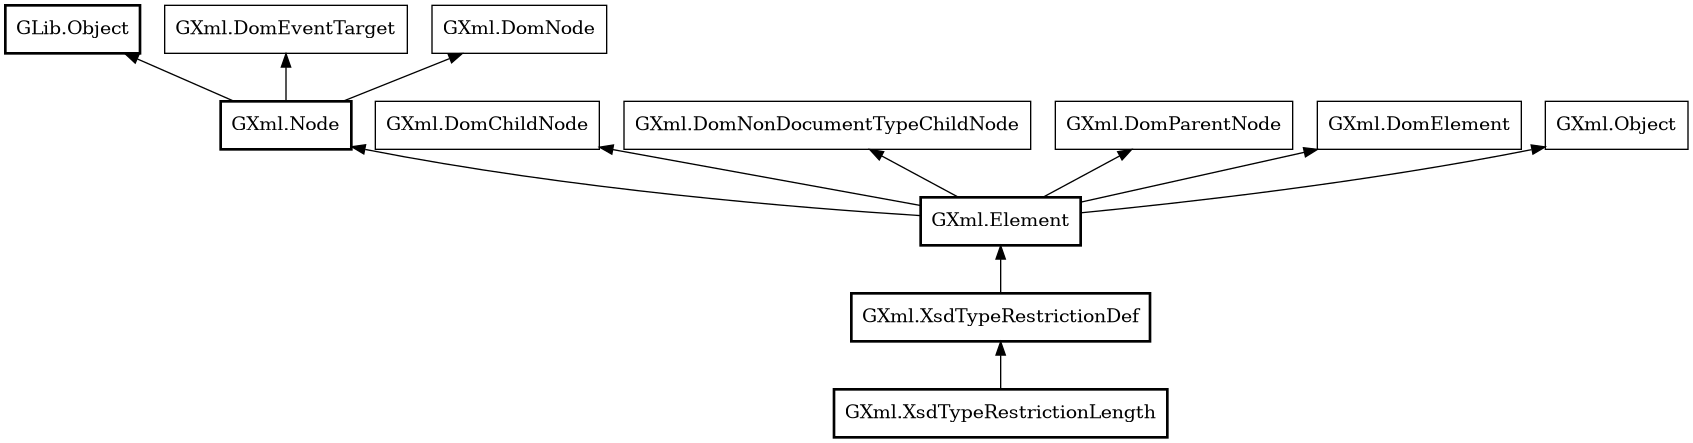 Object hierarchy for XsdTypeRestrictionLength